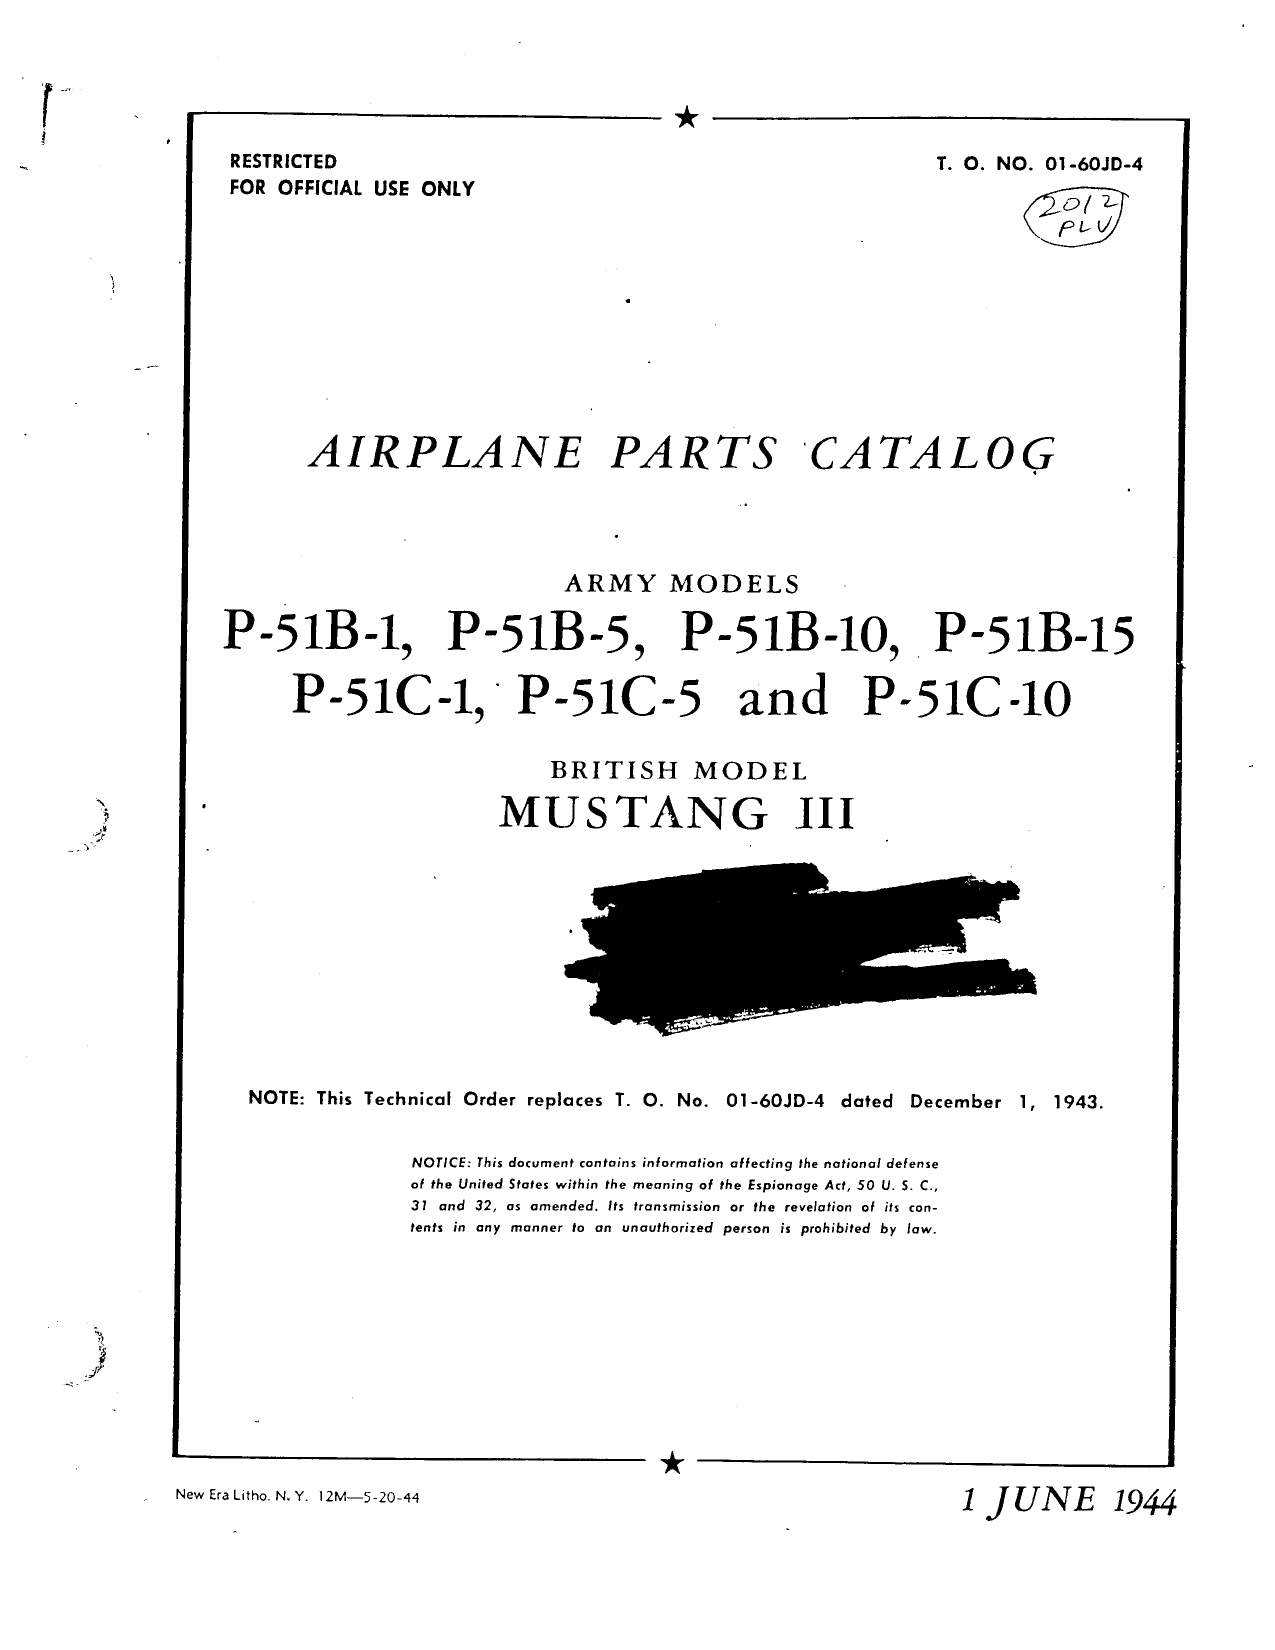 Sample page 1 from AirCorps Library document: Parts Catalog for P-51B-1, P-51B-5, P-51B-10, P-51B-15, P-51C-1, P-51C-5, and P-51C-10